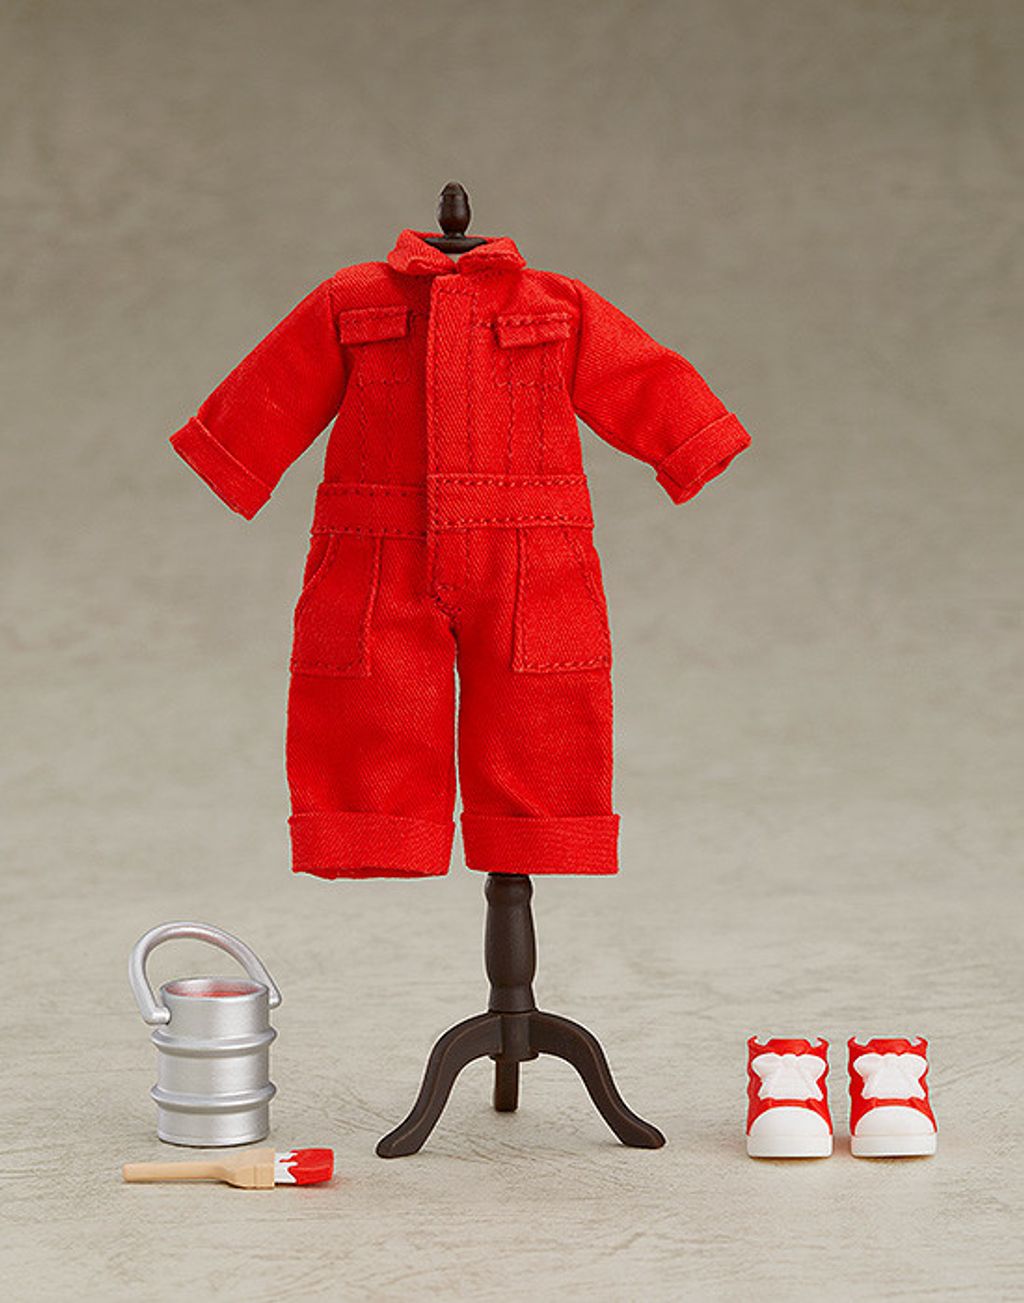 Nendoroid Doll- Outfit Set (Colorful Coveralls - Red).jpg